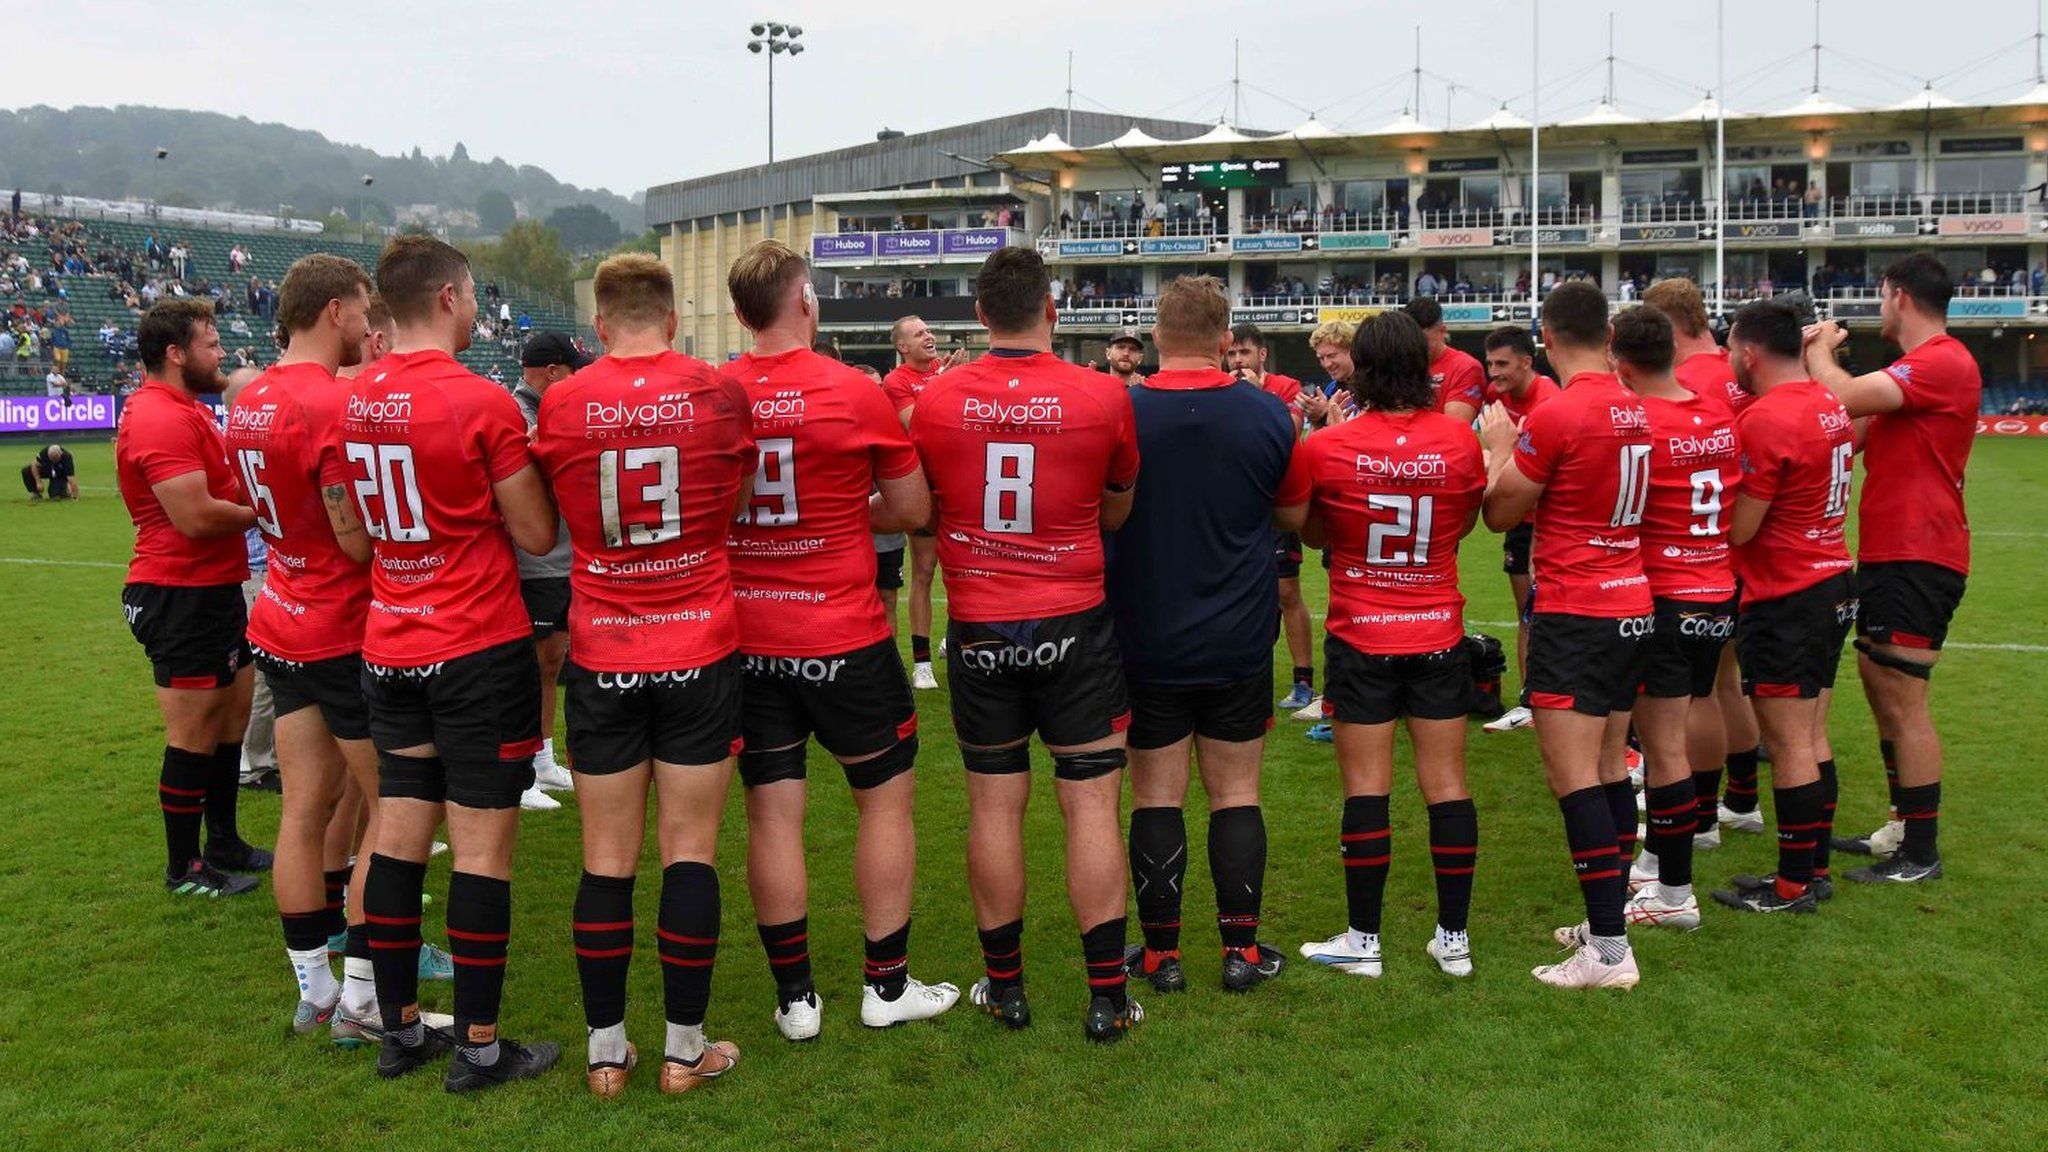 Jersey Reds confirm they have 'ceased trading' amid liquidation